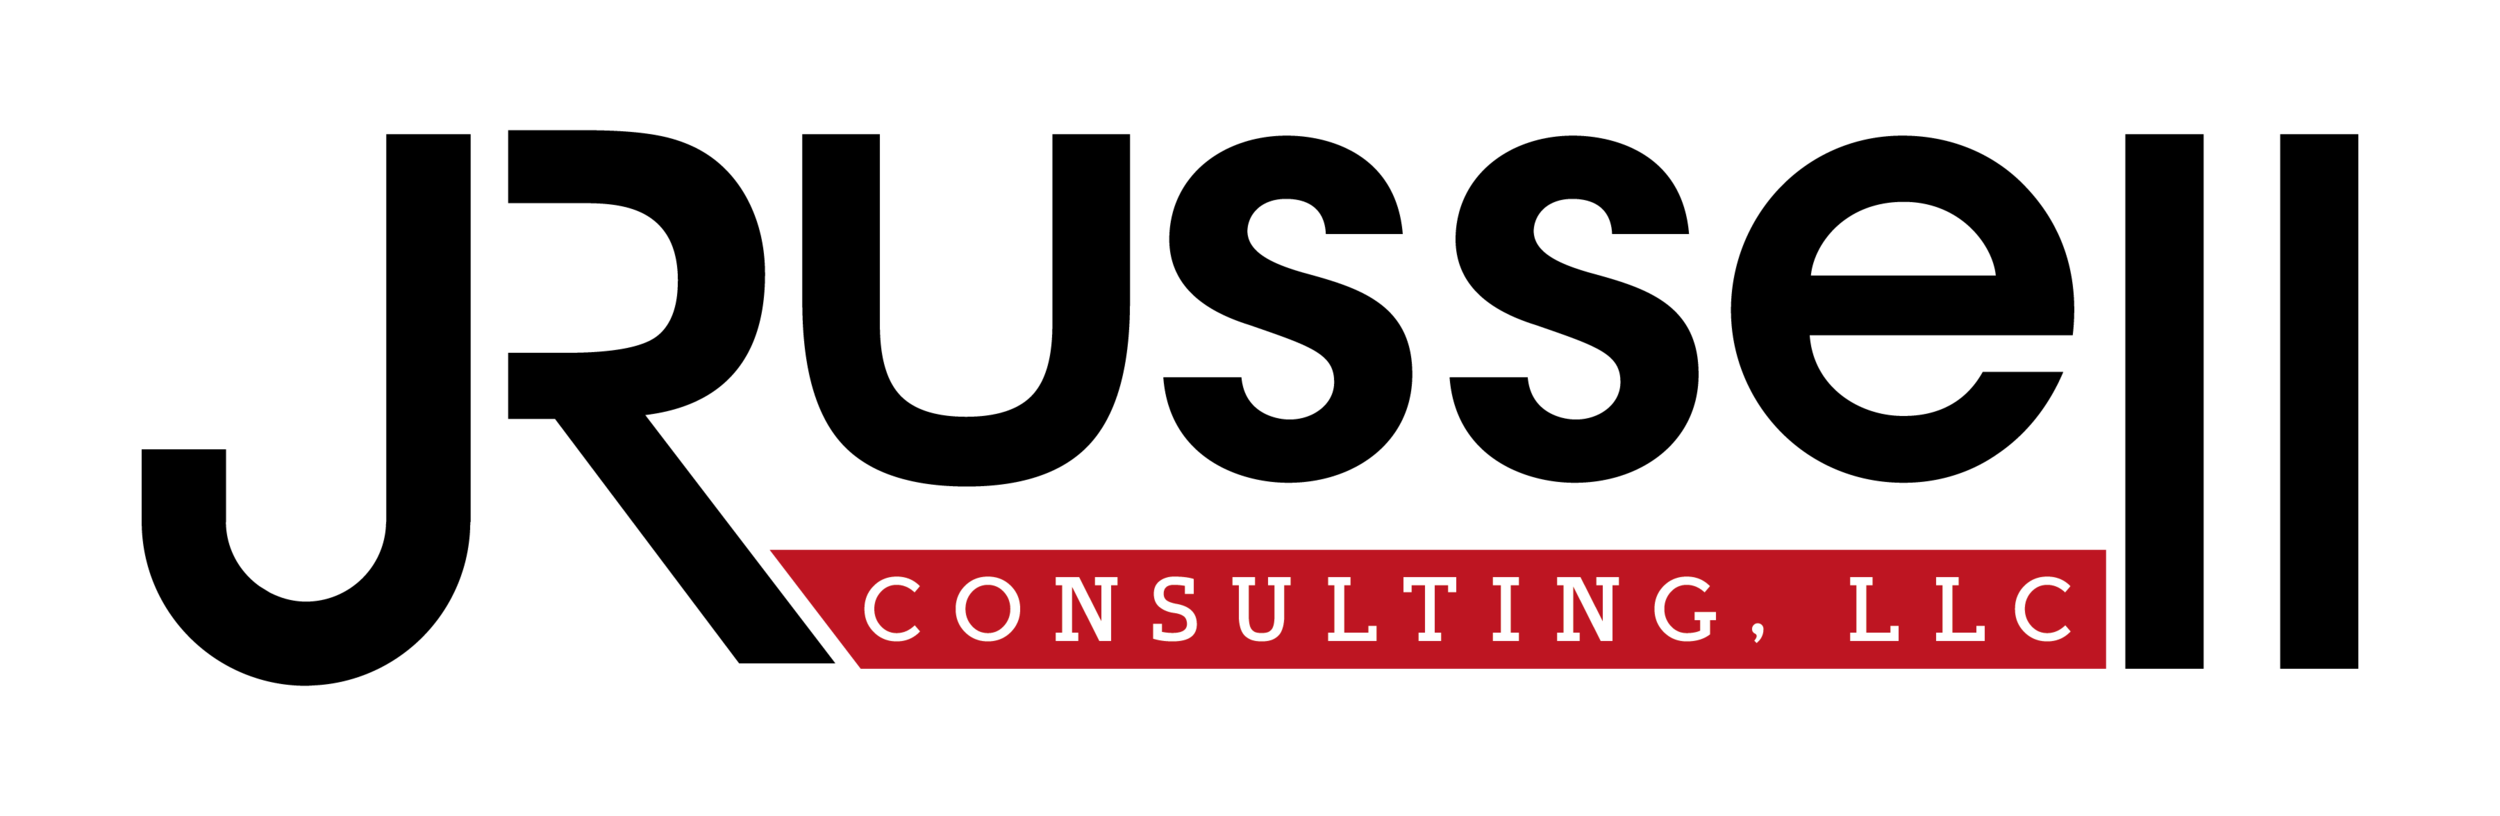 JRussell Consulting, LLC